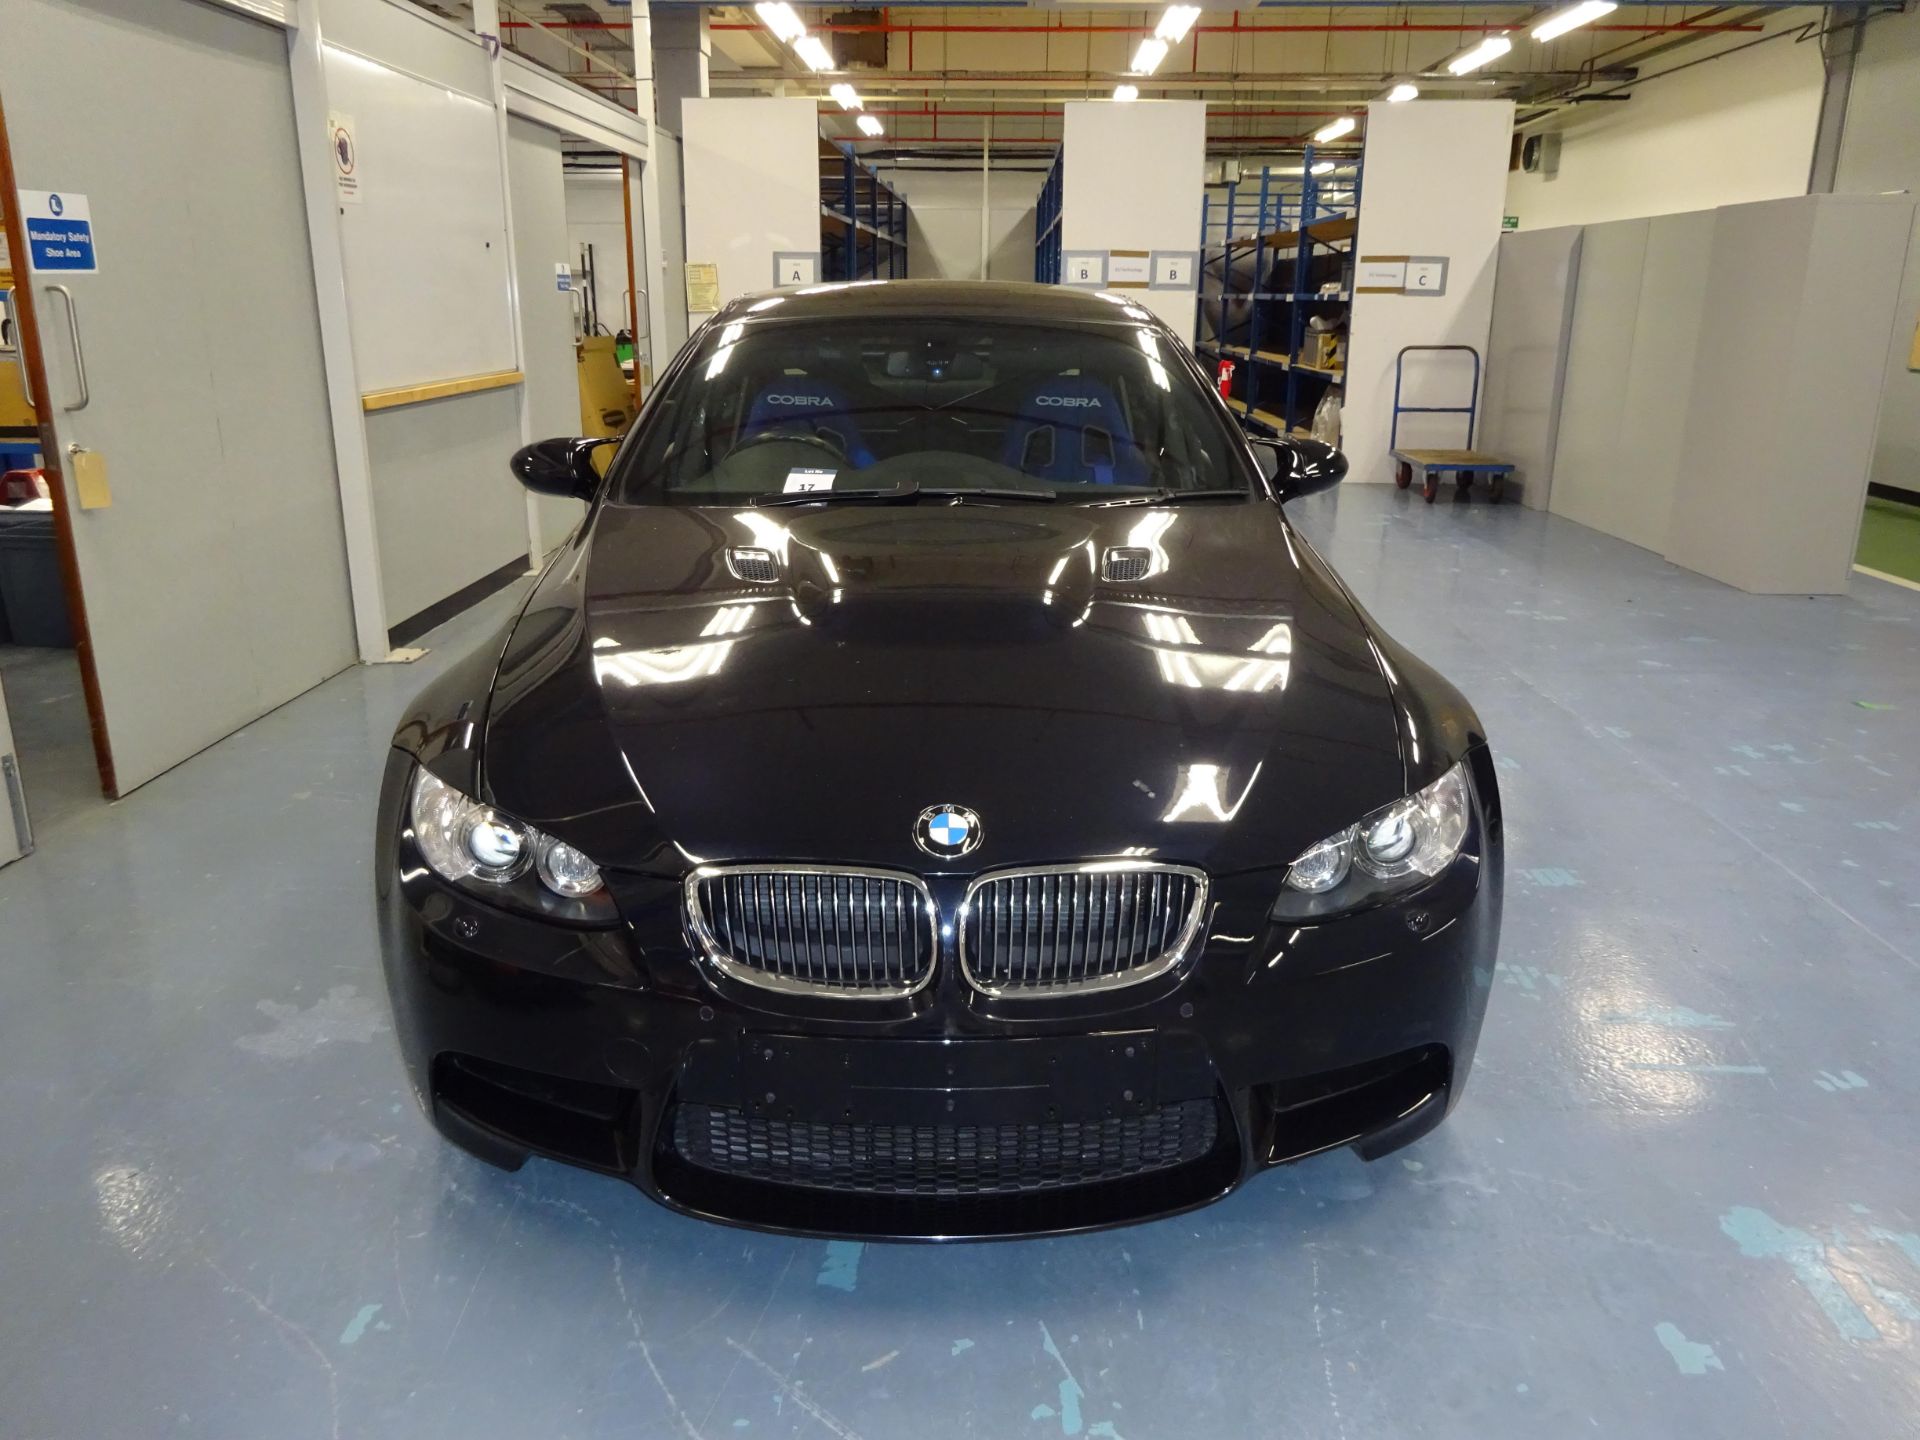 BMW M3 series E92, 2 door Coupe, 4L petrol, 6 speed manual, VIN: WBSWD92020PY34626, Engine No.